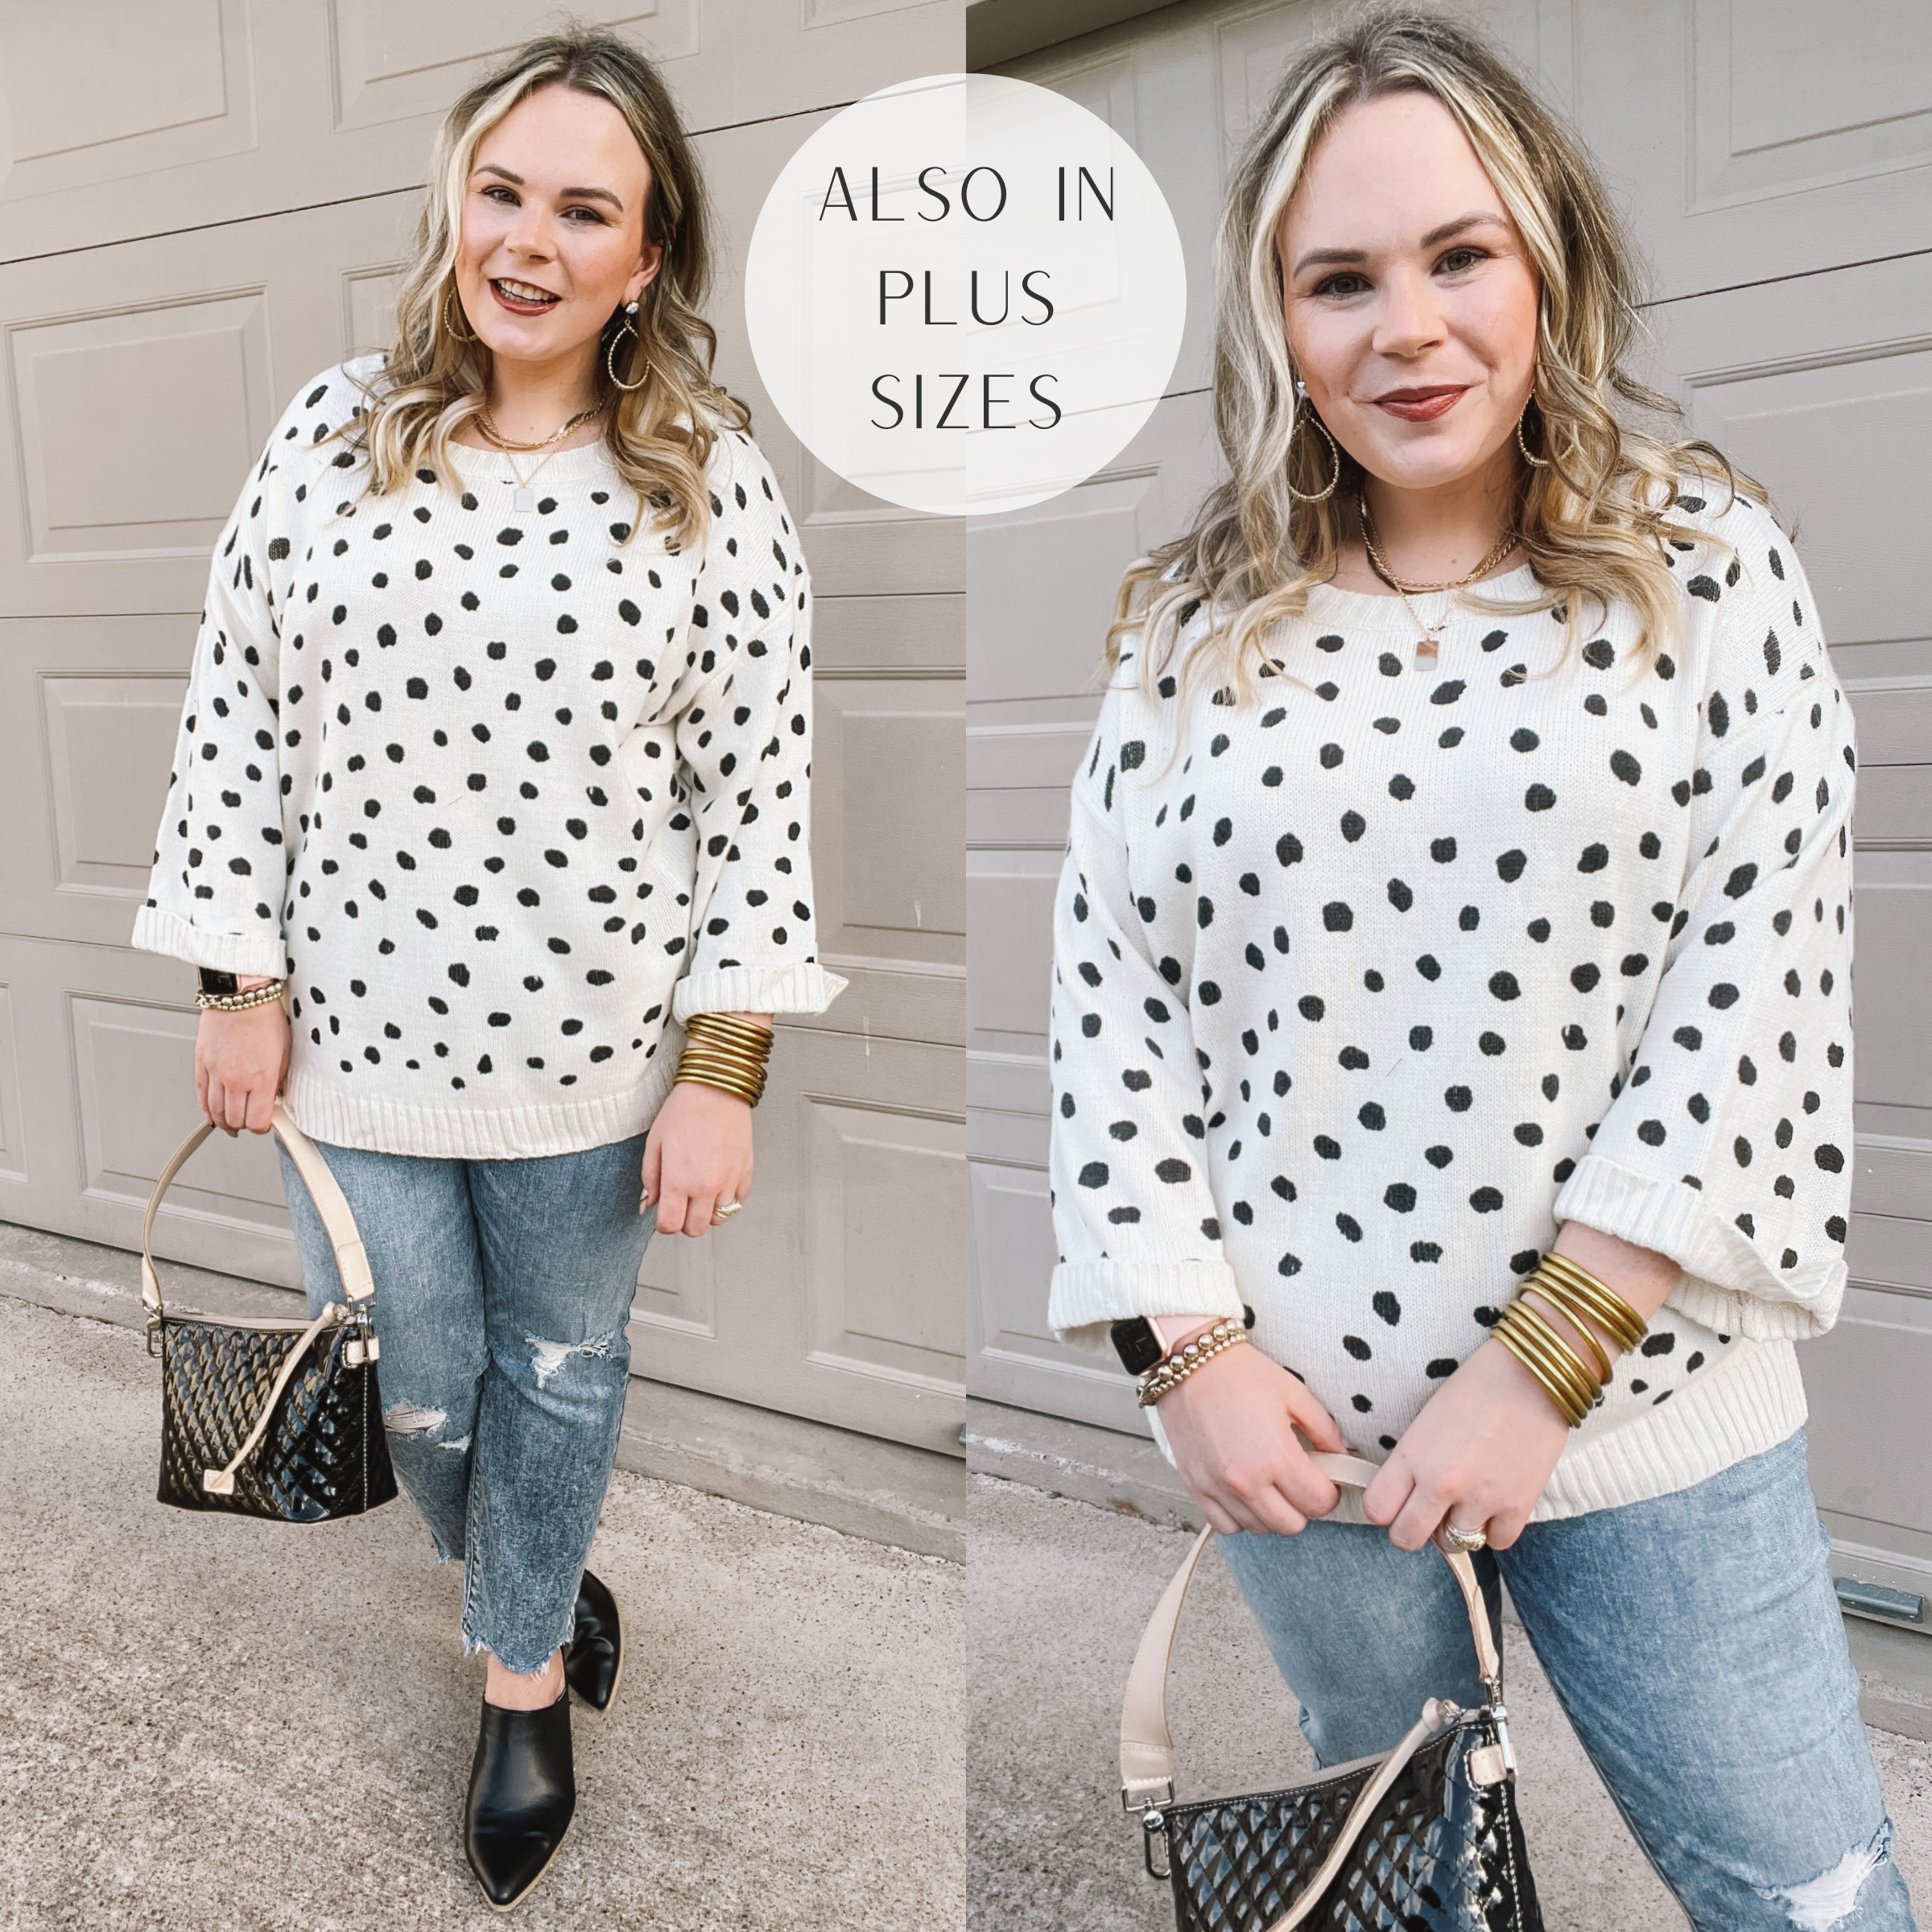 Polka dot blouse & off white skirt with ankle boots - Nancys Fashion Style